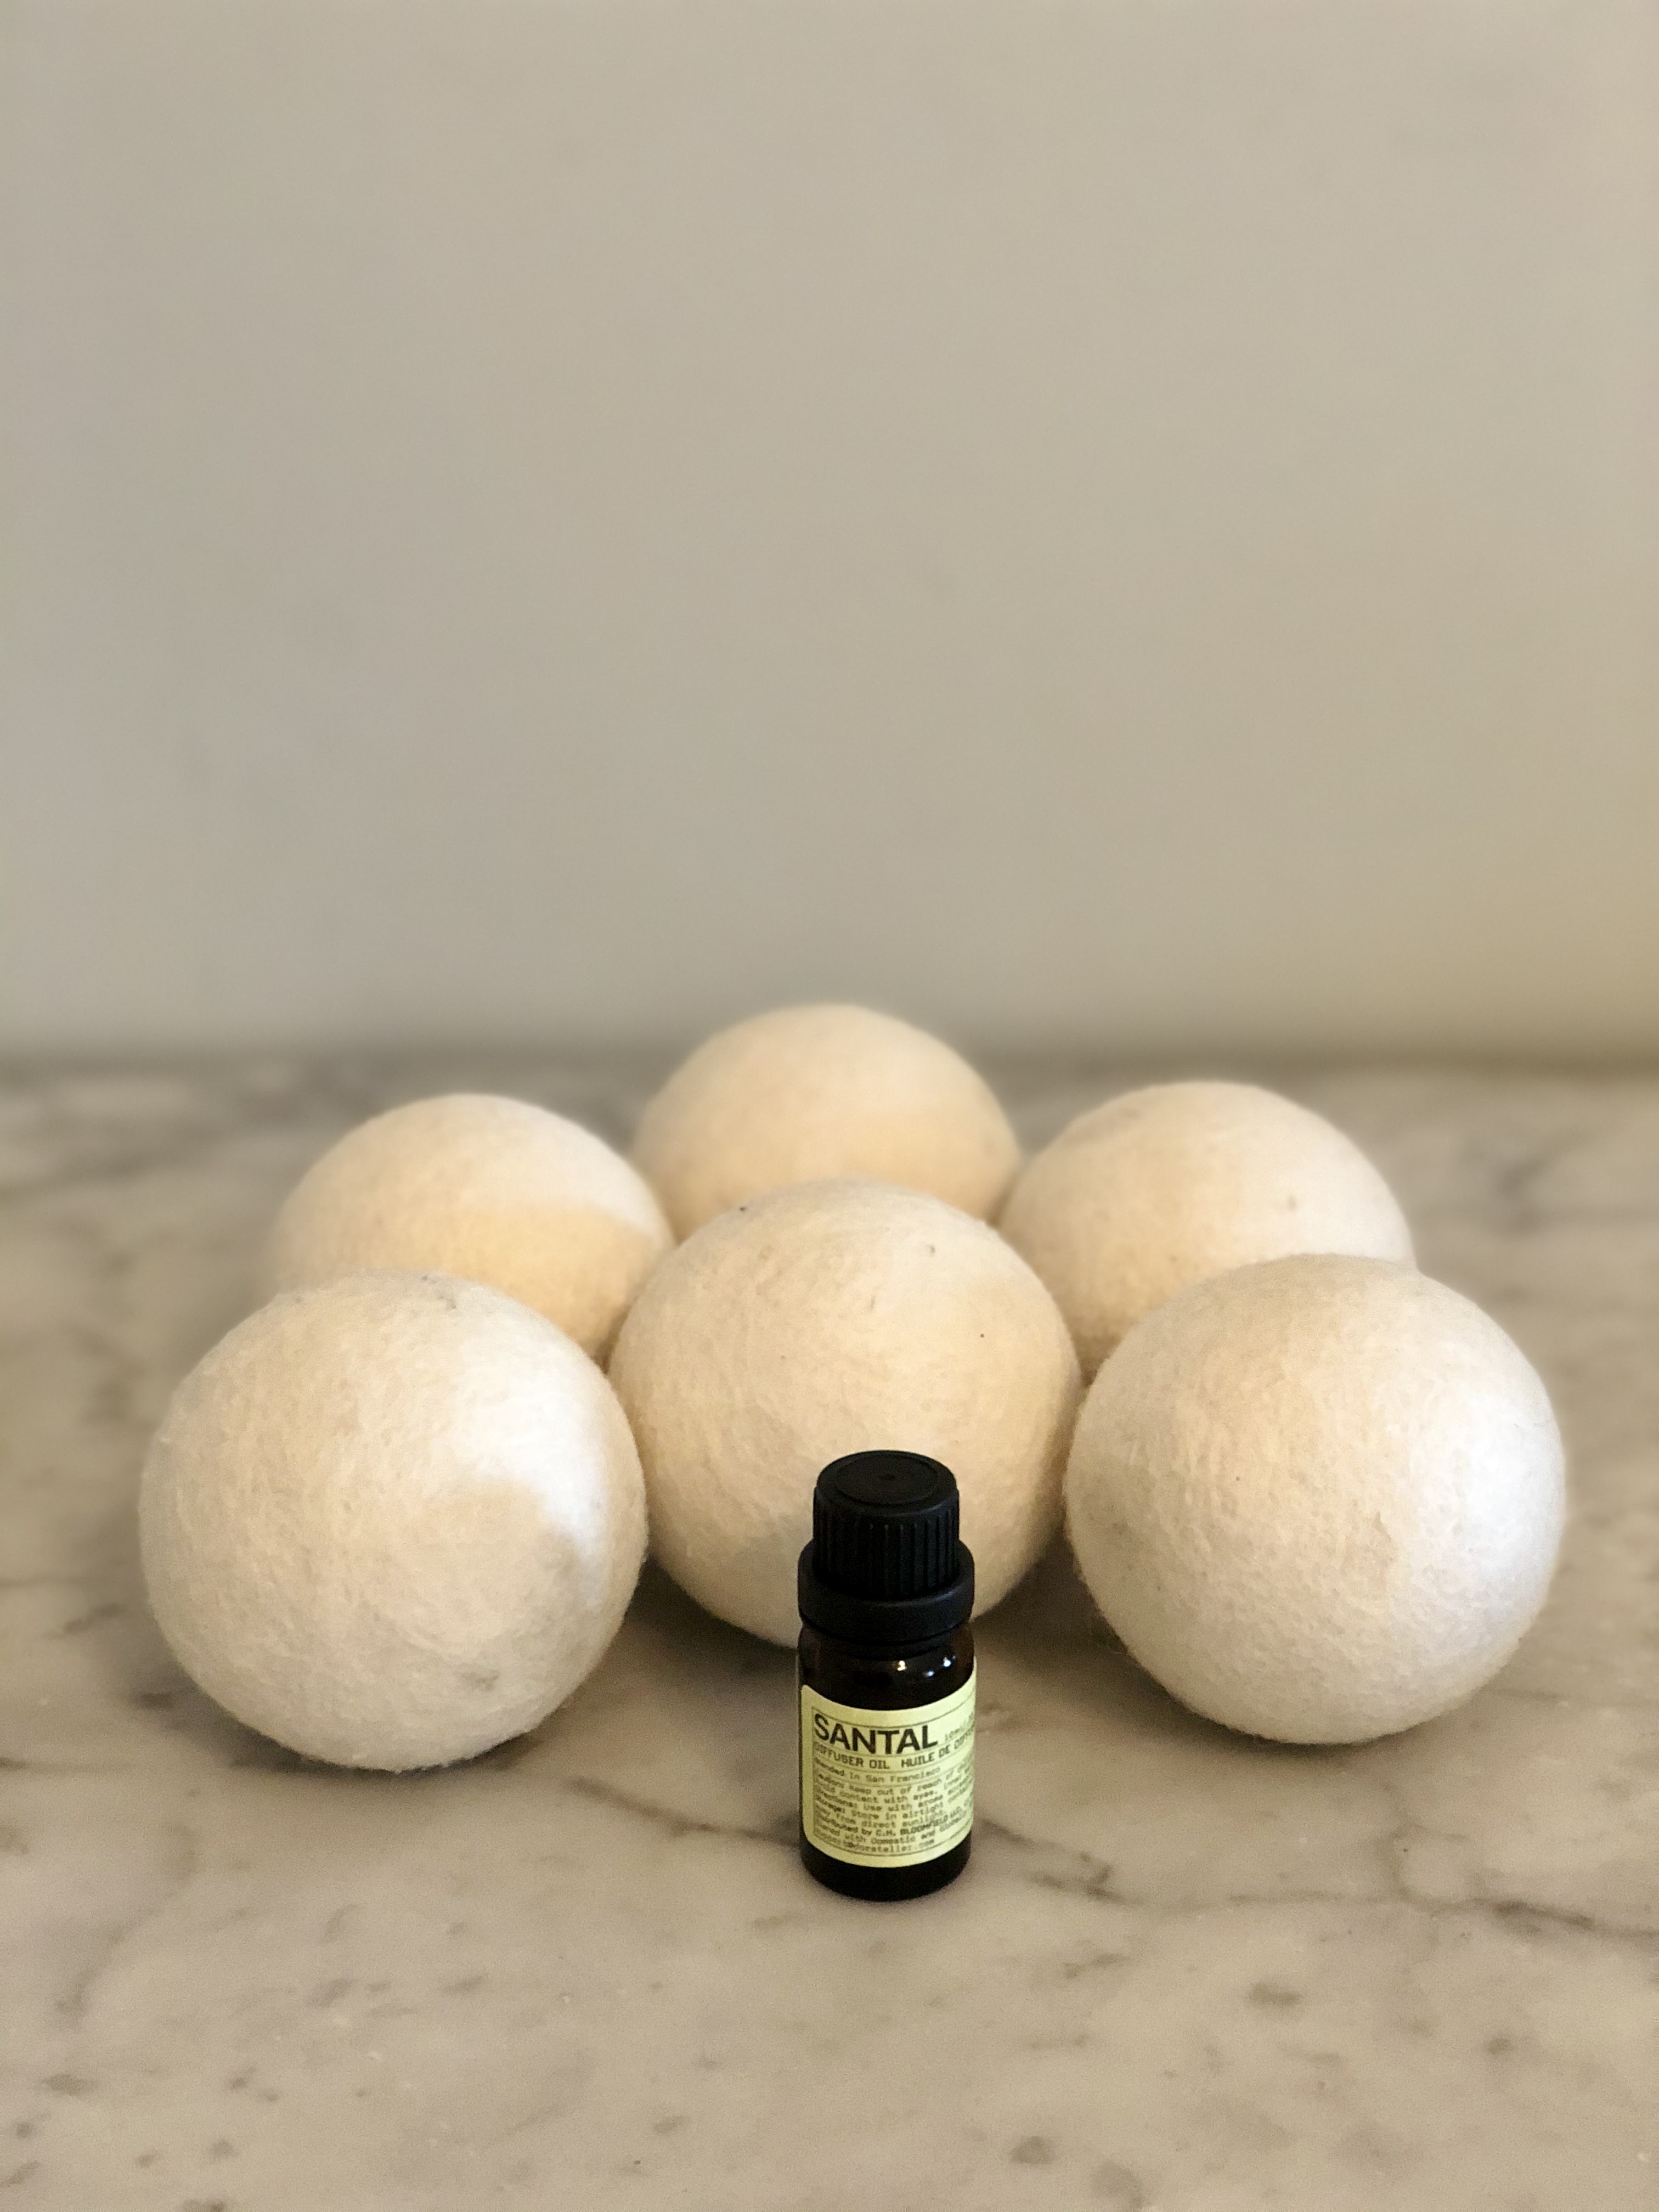 An Honest Review of DIY Essential Oil Dryer Sheets